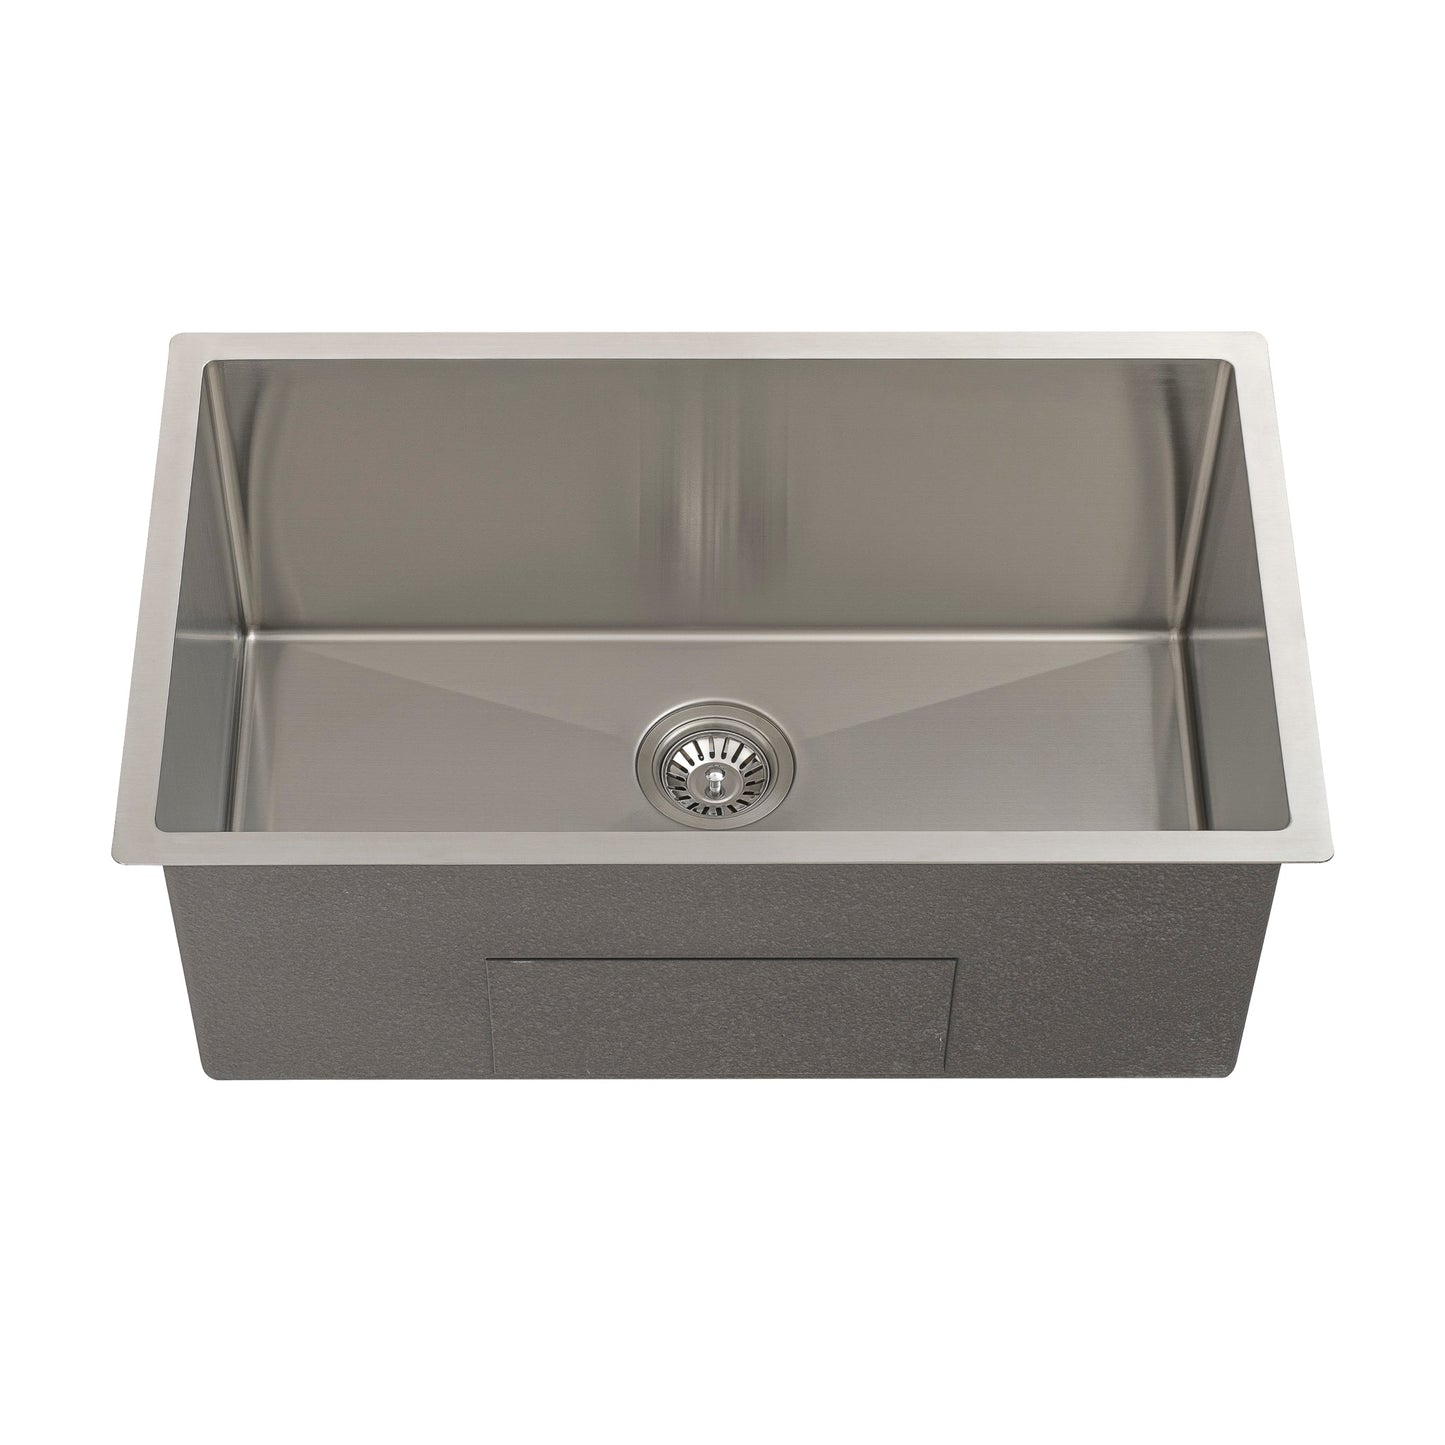 Retto II 750mm x 450mm x 300mm Extra Height Stainless Steel Sink, Brushed Nickel Silver